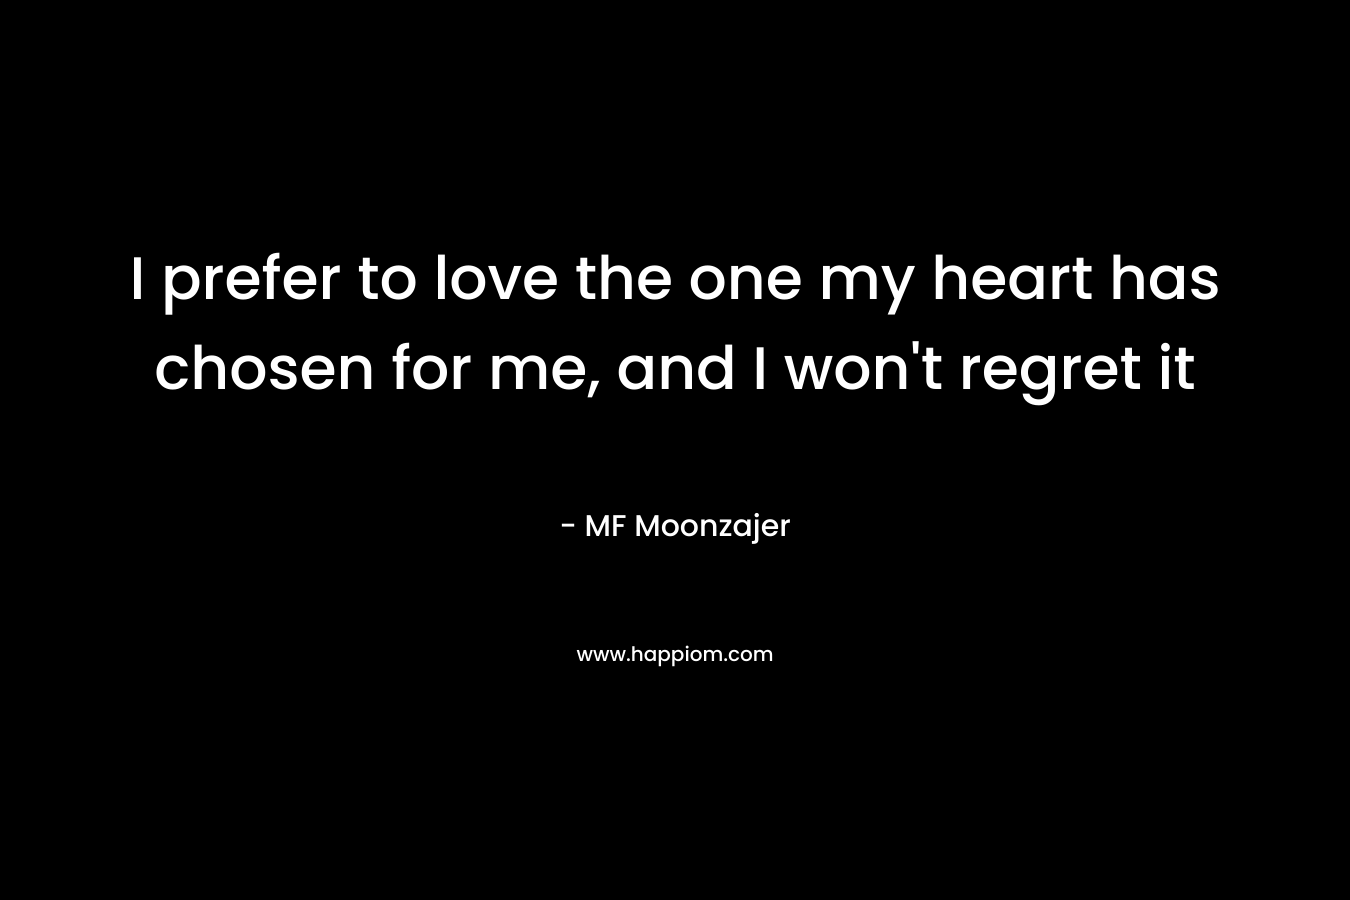 I prefer to love the one my heart has chosen for me, and I won’t regret it – MF Moonzajer